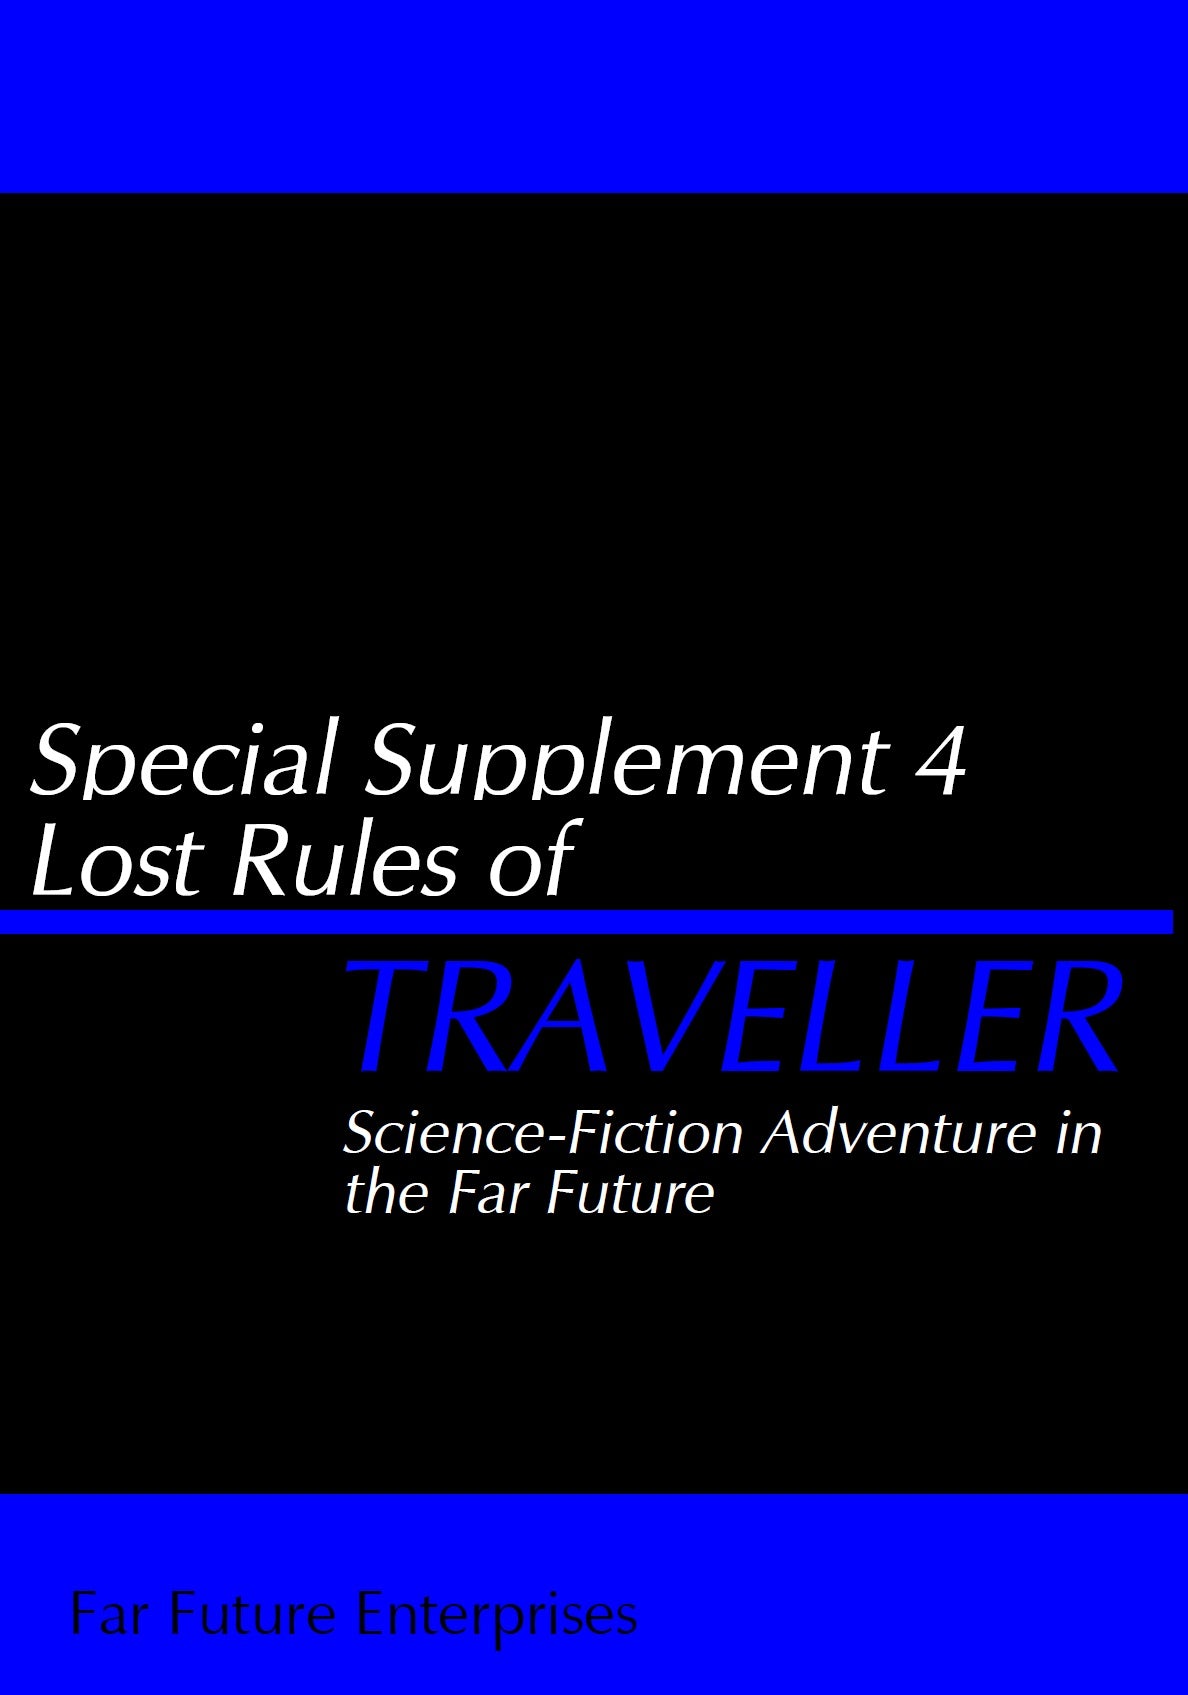 Special Supplement 4: Lost Rules of Traveller ebook